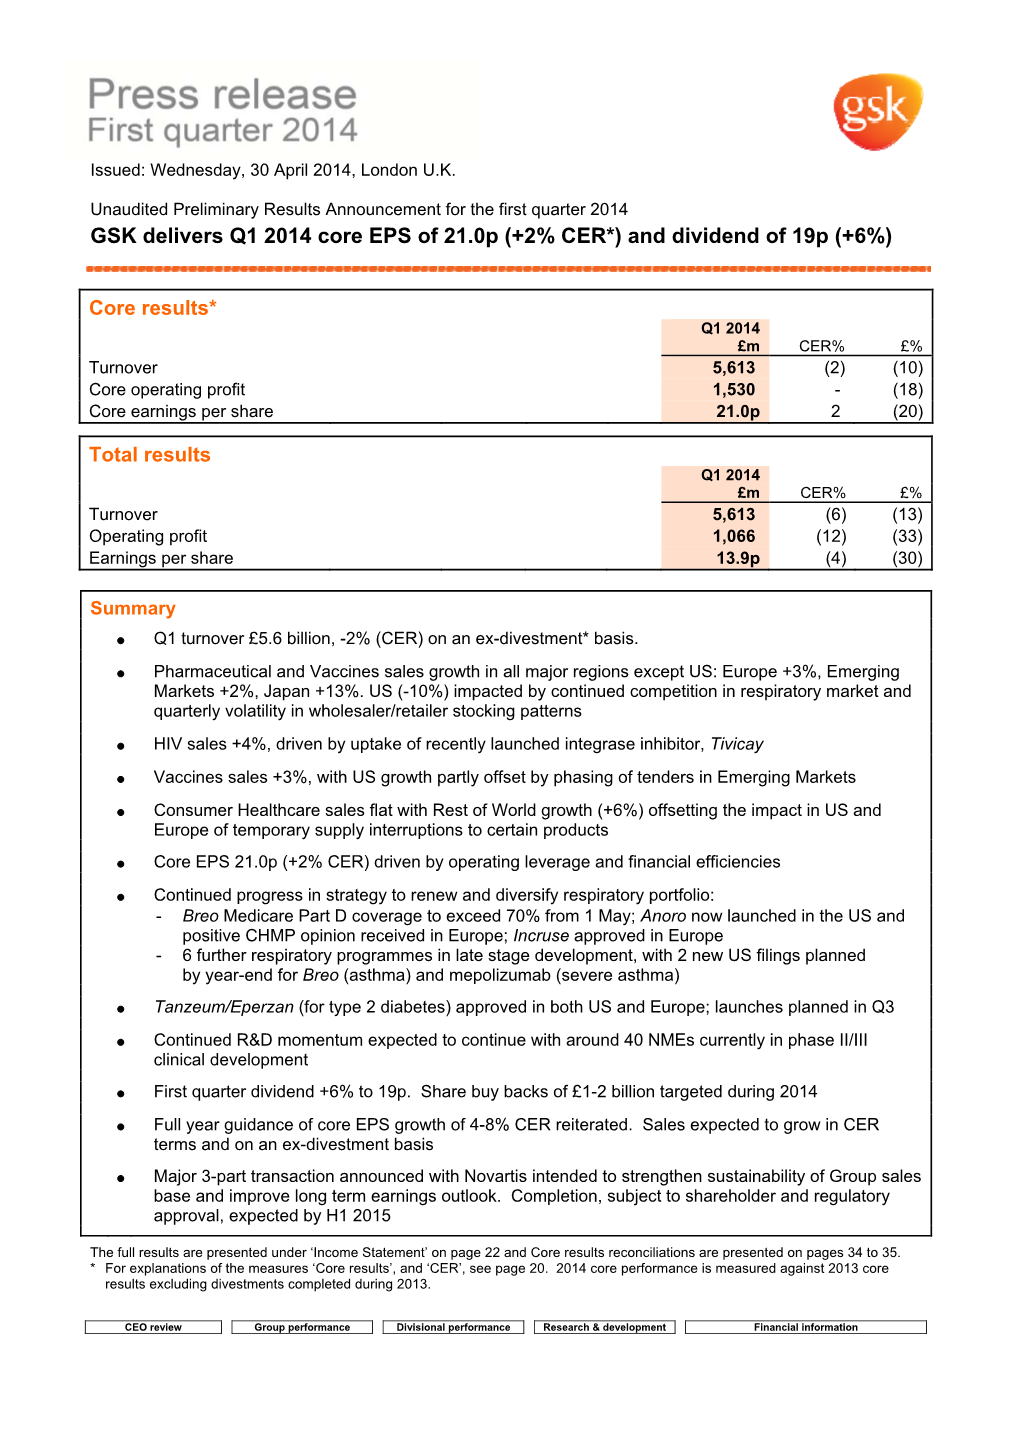 GSK Delivers Q1 2014 Core EPS of 21.0P (+2% CER*) and Dividend of 19P (+6%)